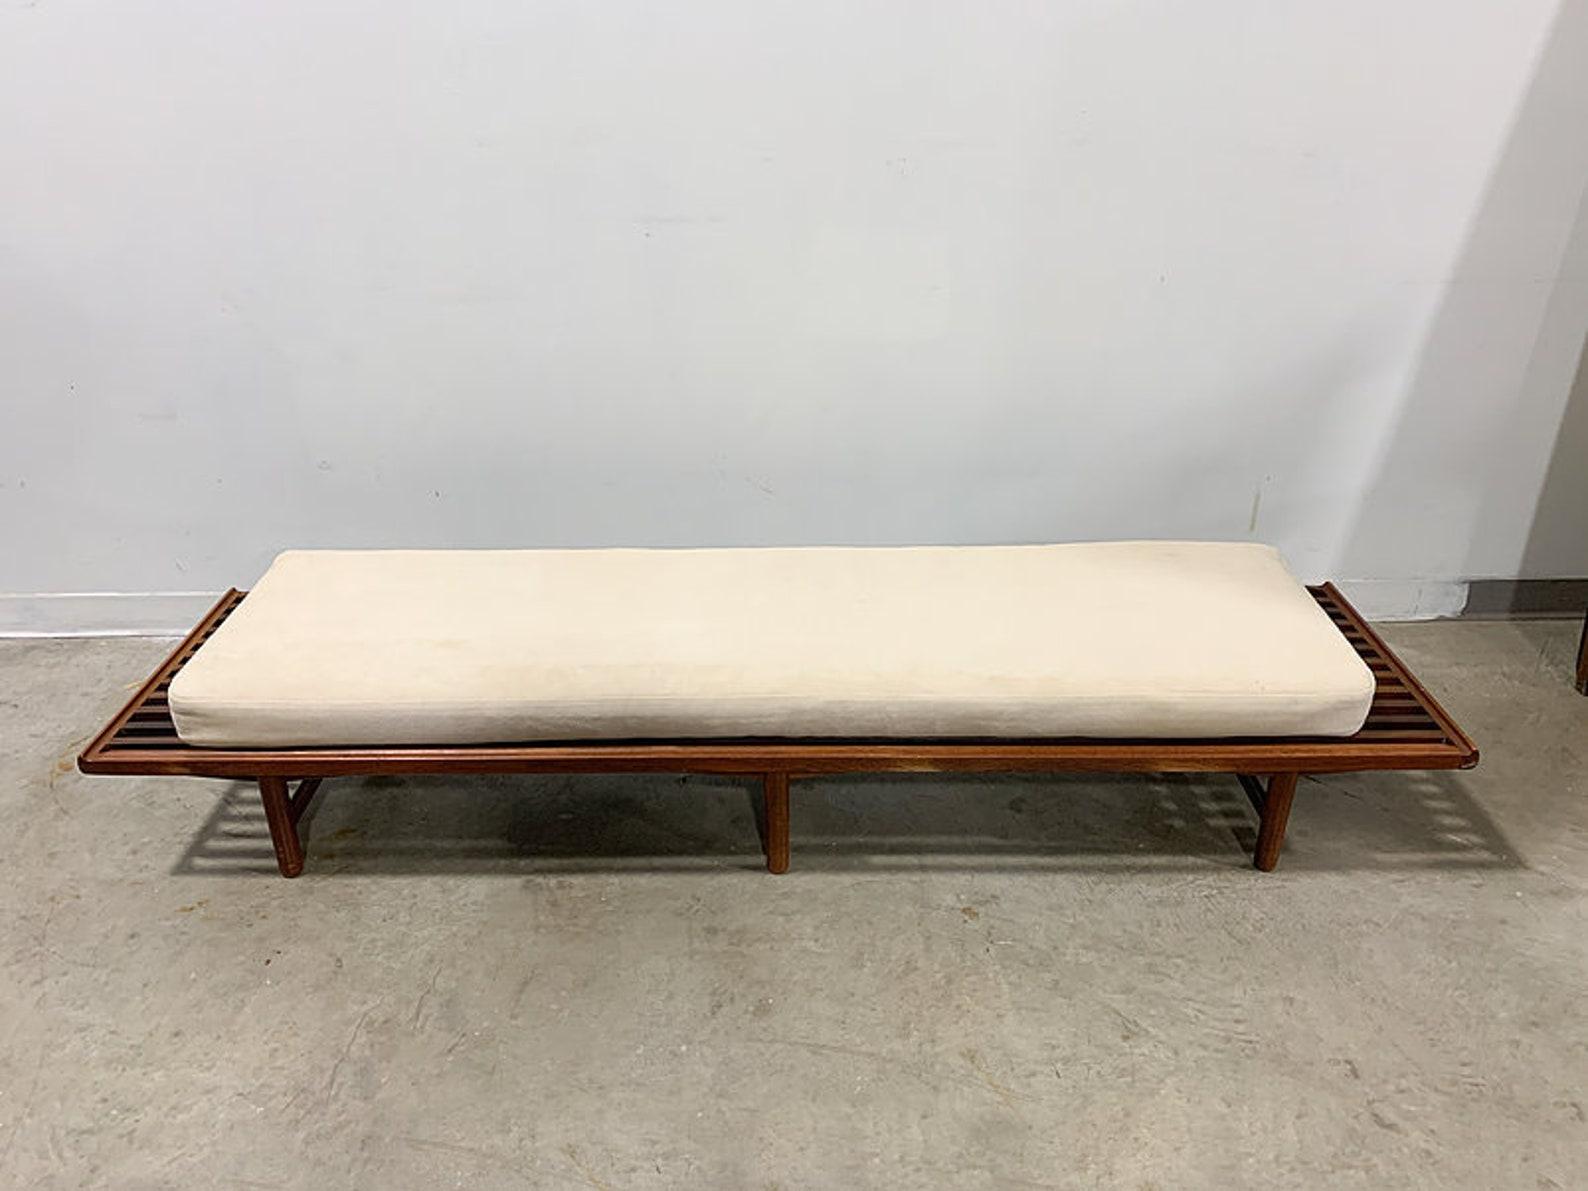 Beautifully detailed solid teak slat bench designed by Gerhard Berg for P.I. Langlo Fabrikker of Norway circa 1959. Originally designed as part of a modular seating system, this bench works equally well with a cushion as shown and could also be used